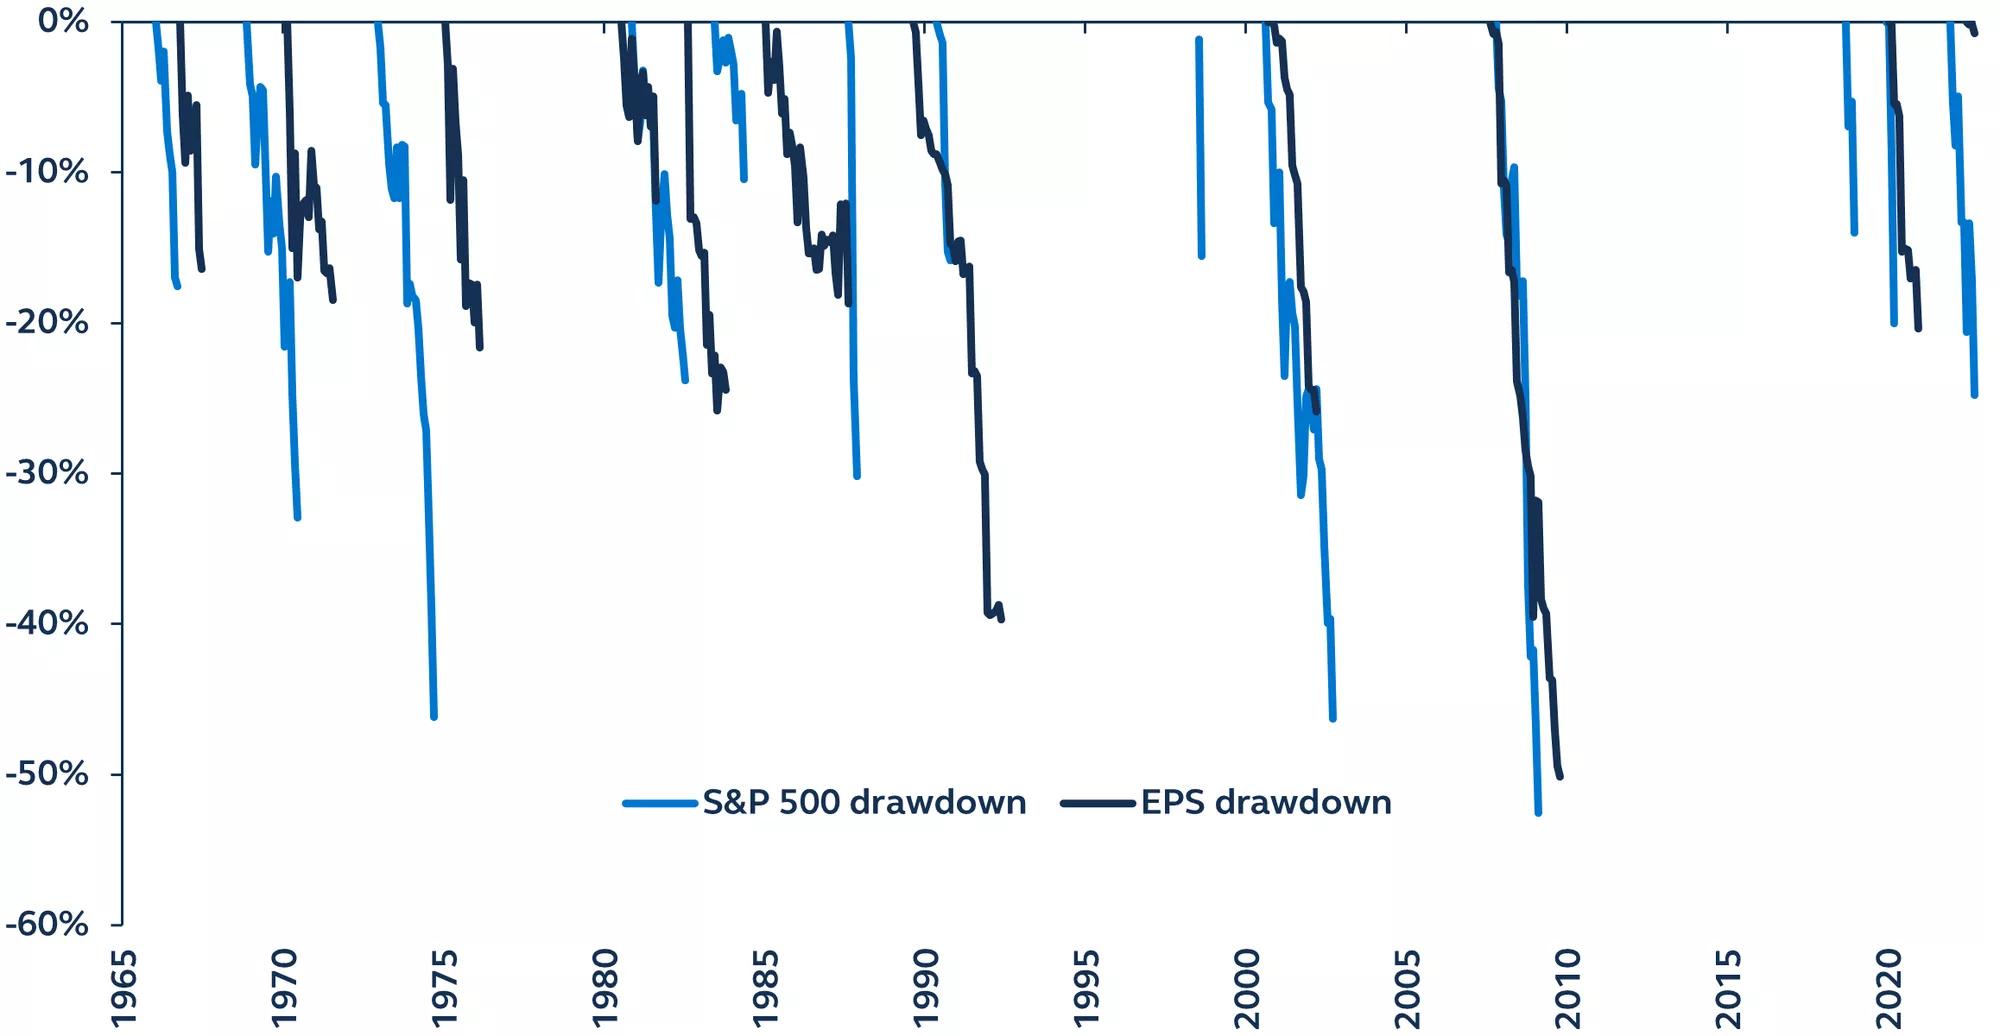 Chart showing peak-trough drawdowns greater than 10% in the S&P 500 Index, earnings per share, 1965-2022